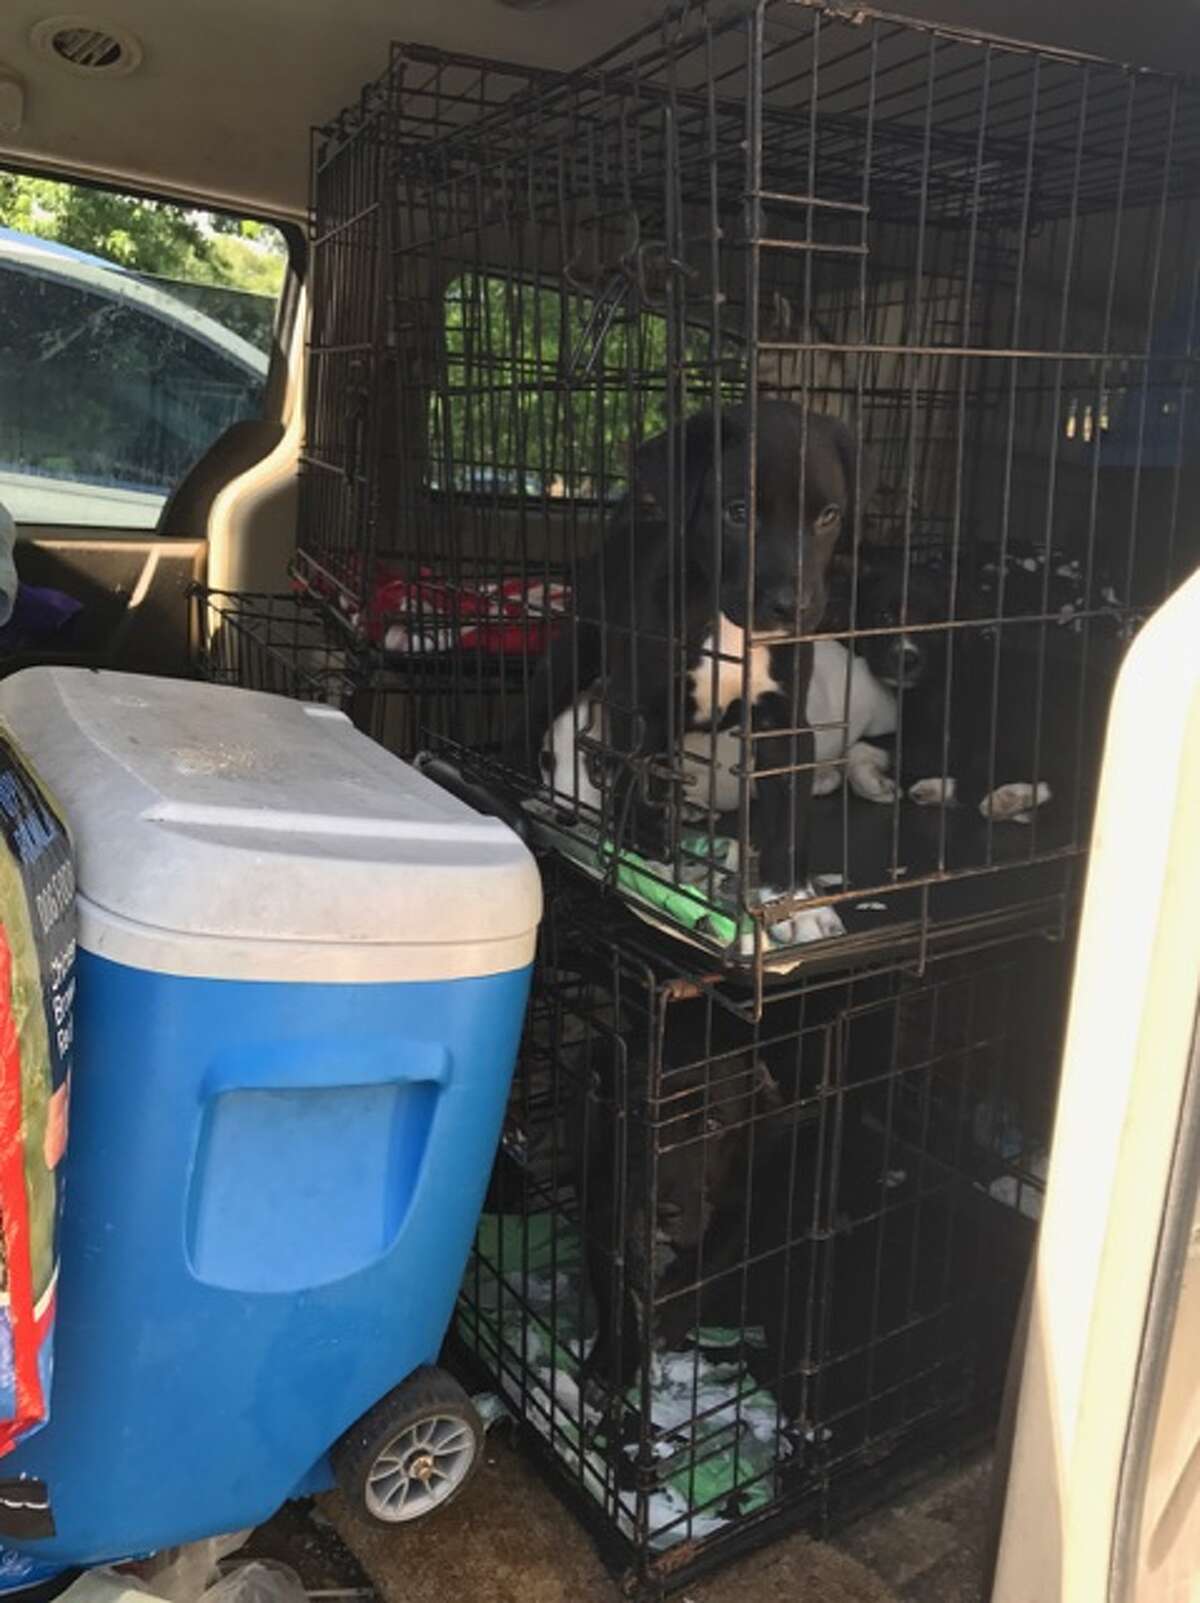 The Humane Society of North Texas and Keller Animal Control officers seized 27 dogs and 84 cats from a home in the 300 block of Anita Avenue in Keller, Texas on July 25, 2017.